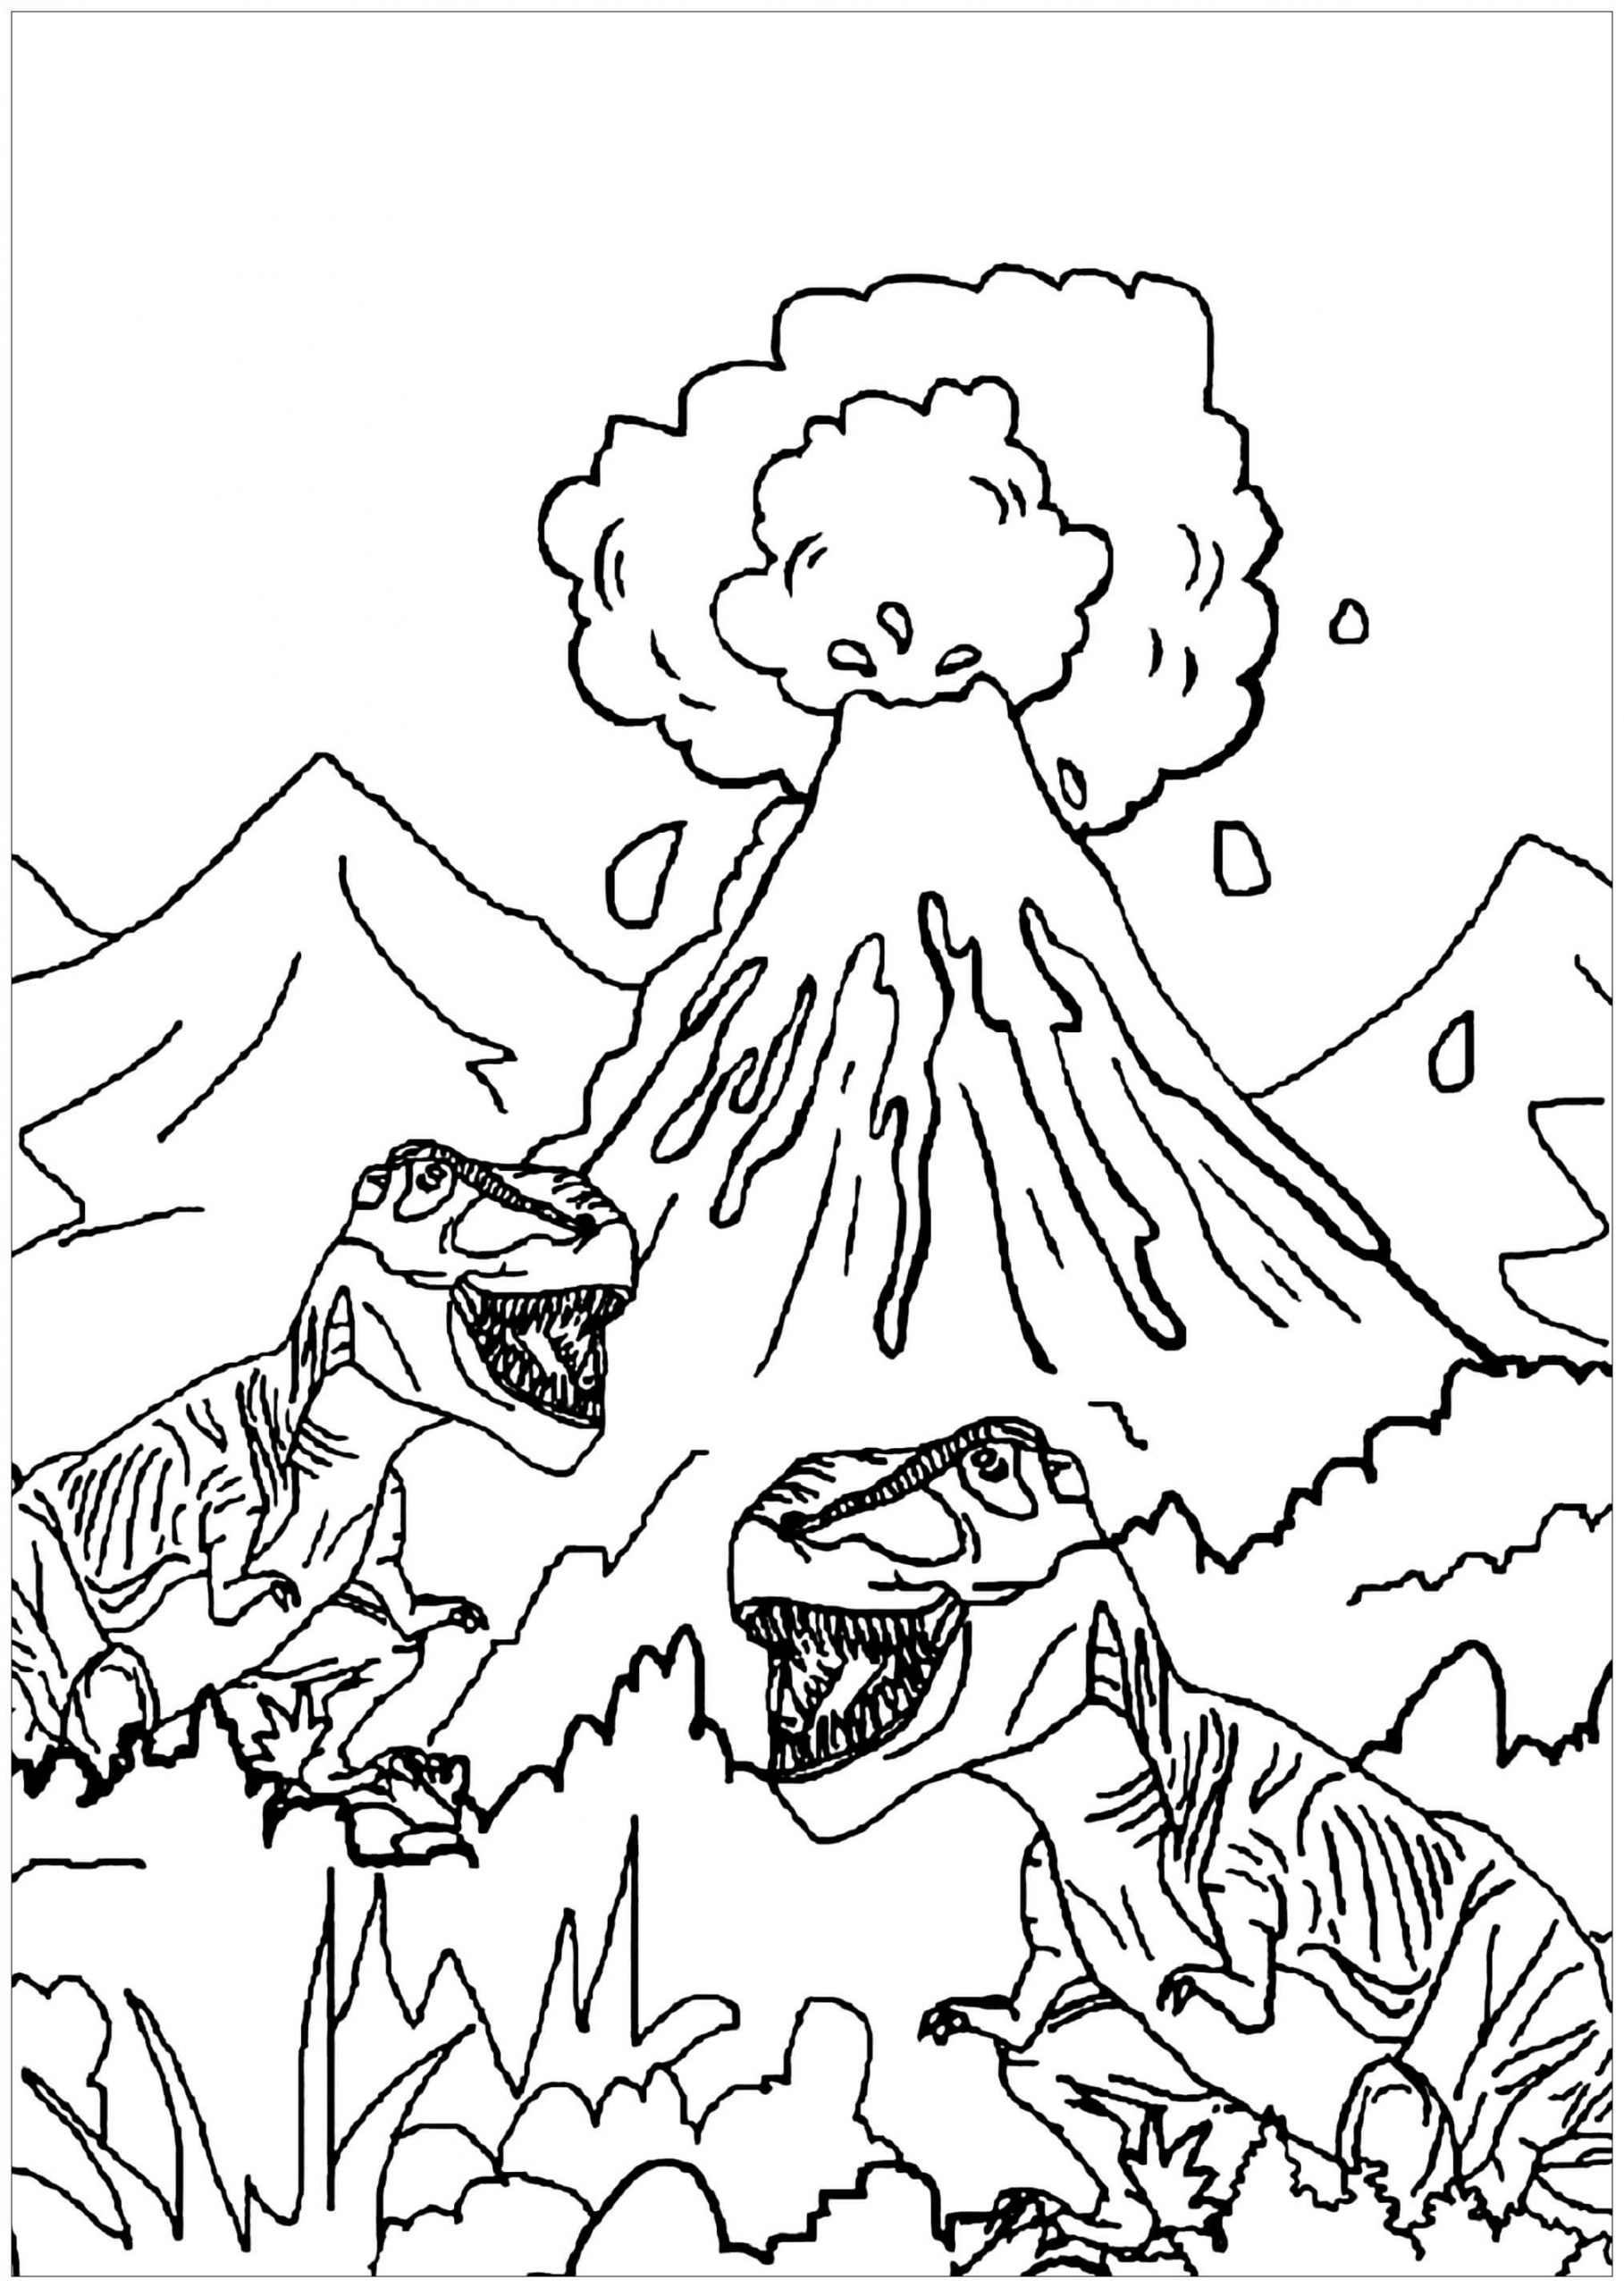 T-Rex와 화산 coloring page